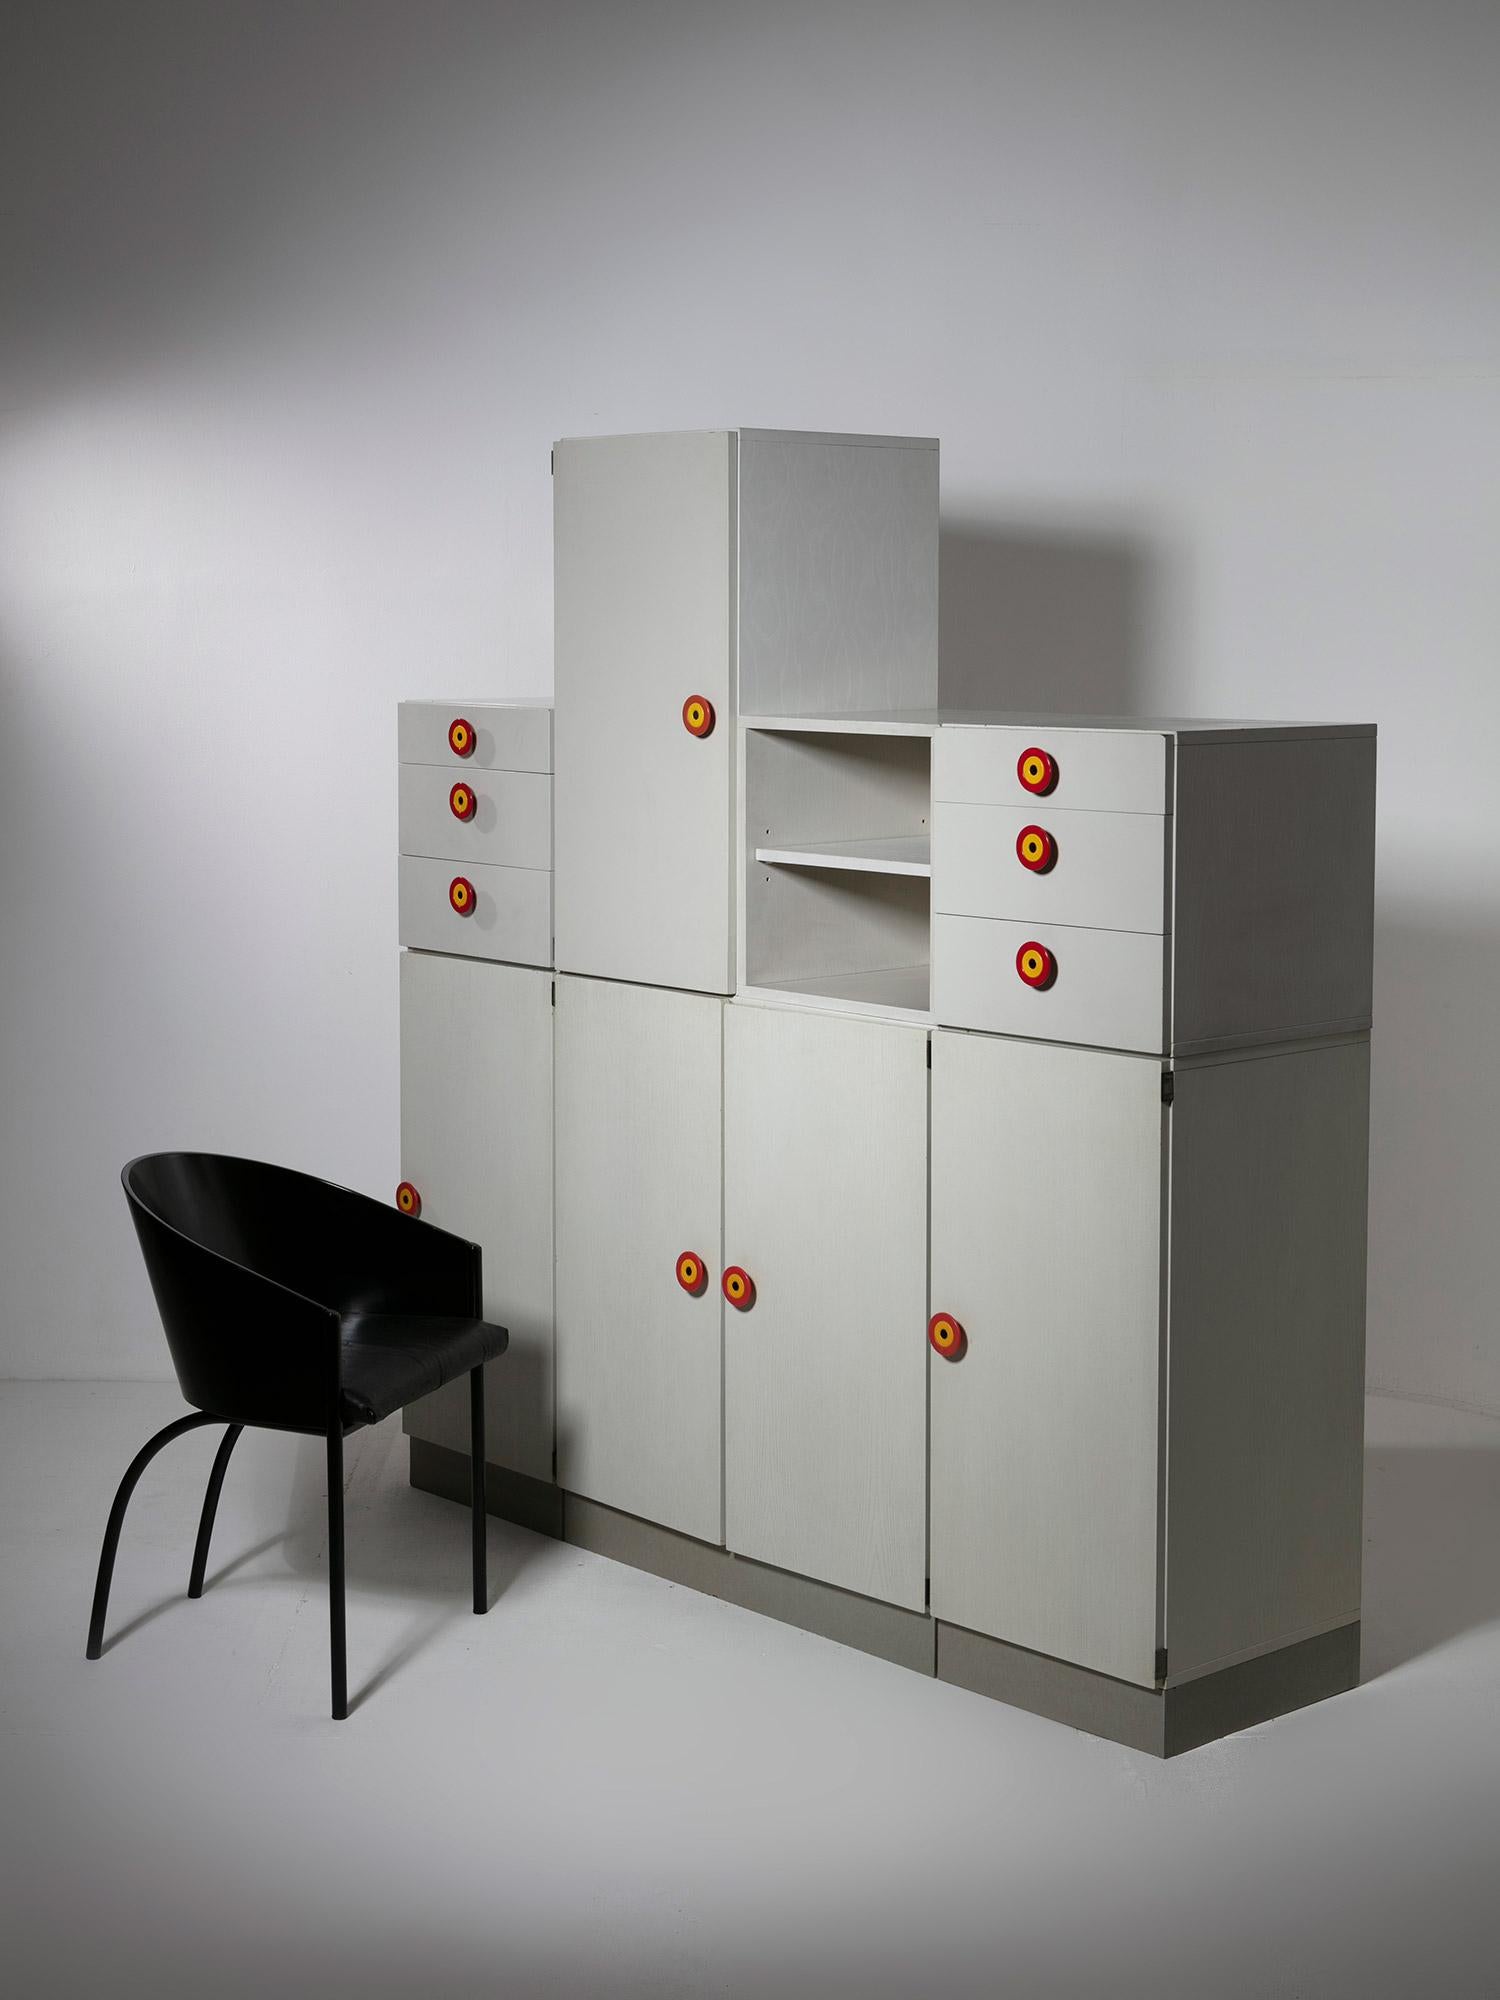 Radical Design Kubirolo Cabinets by Ettore Sottsass for Poltronova, Italy, 1960s For Sale 3